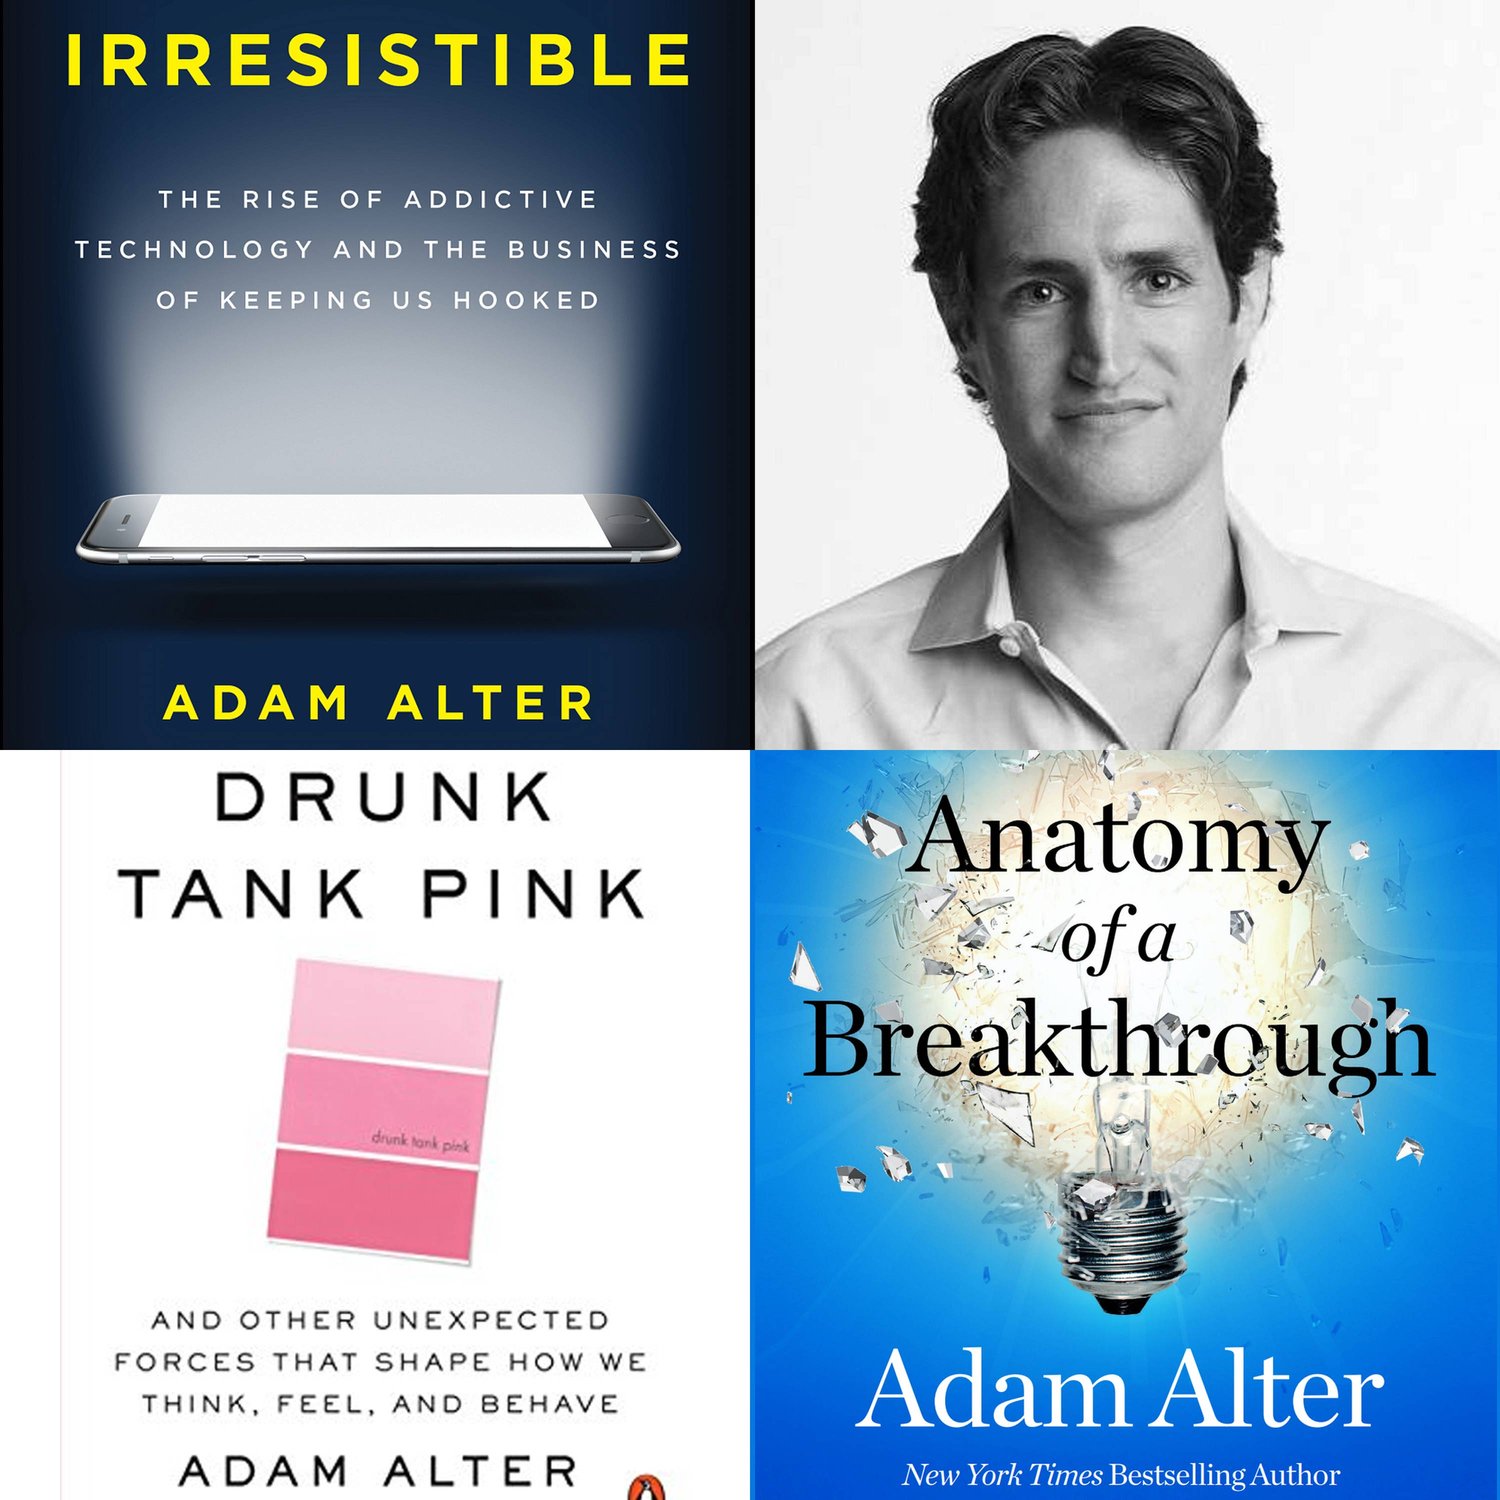 Highlights - ADAM ALTER - Author of Irresistible: The Rise of Addictive Technology - Professor NYU’s Stern School of Business